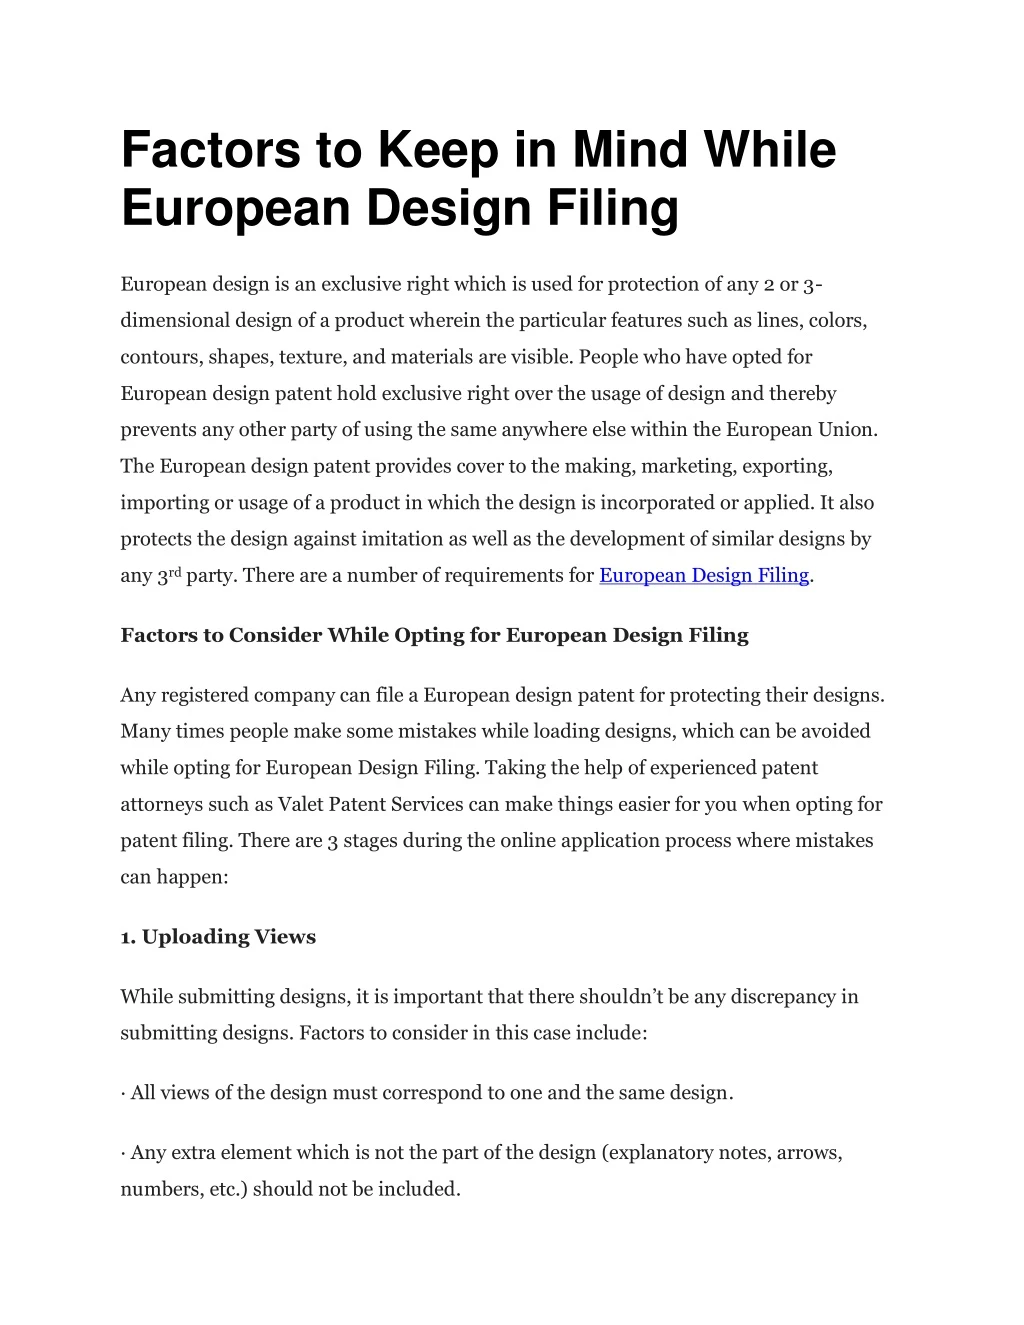 factors to keep in mind while european design